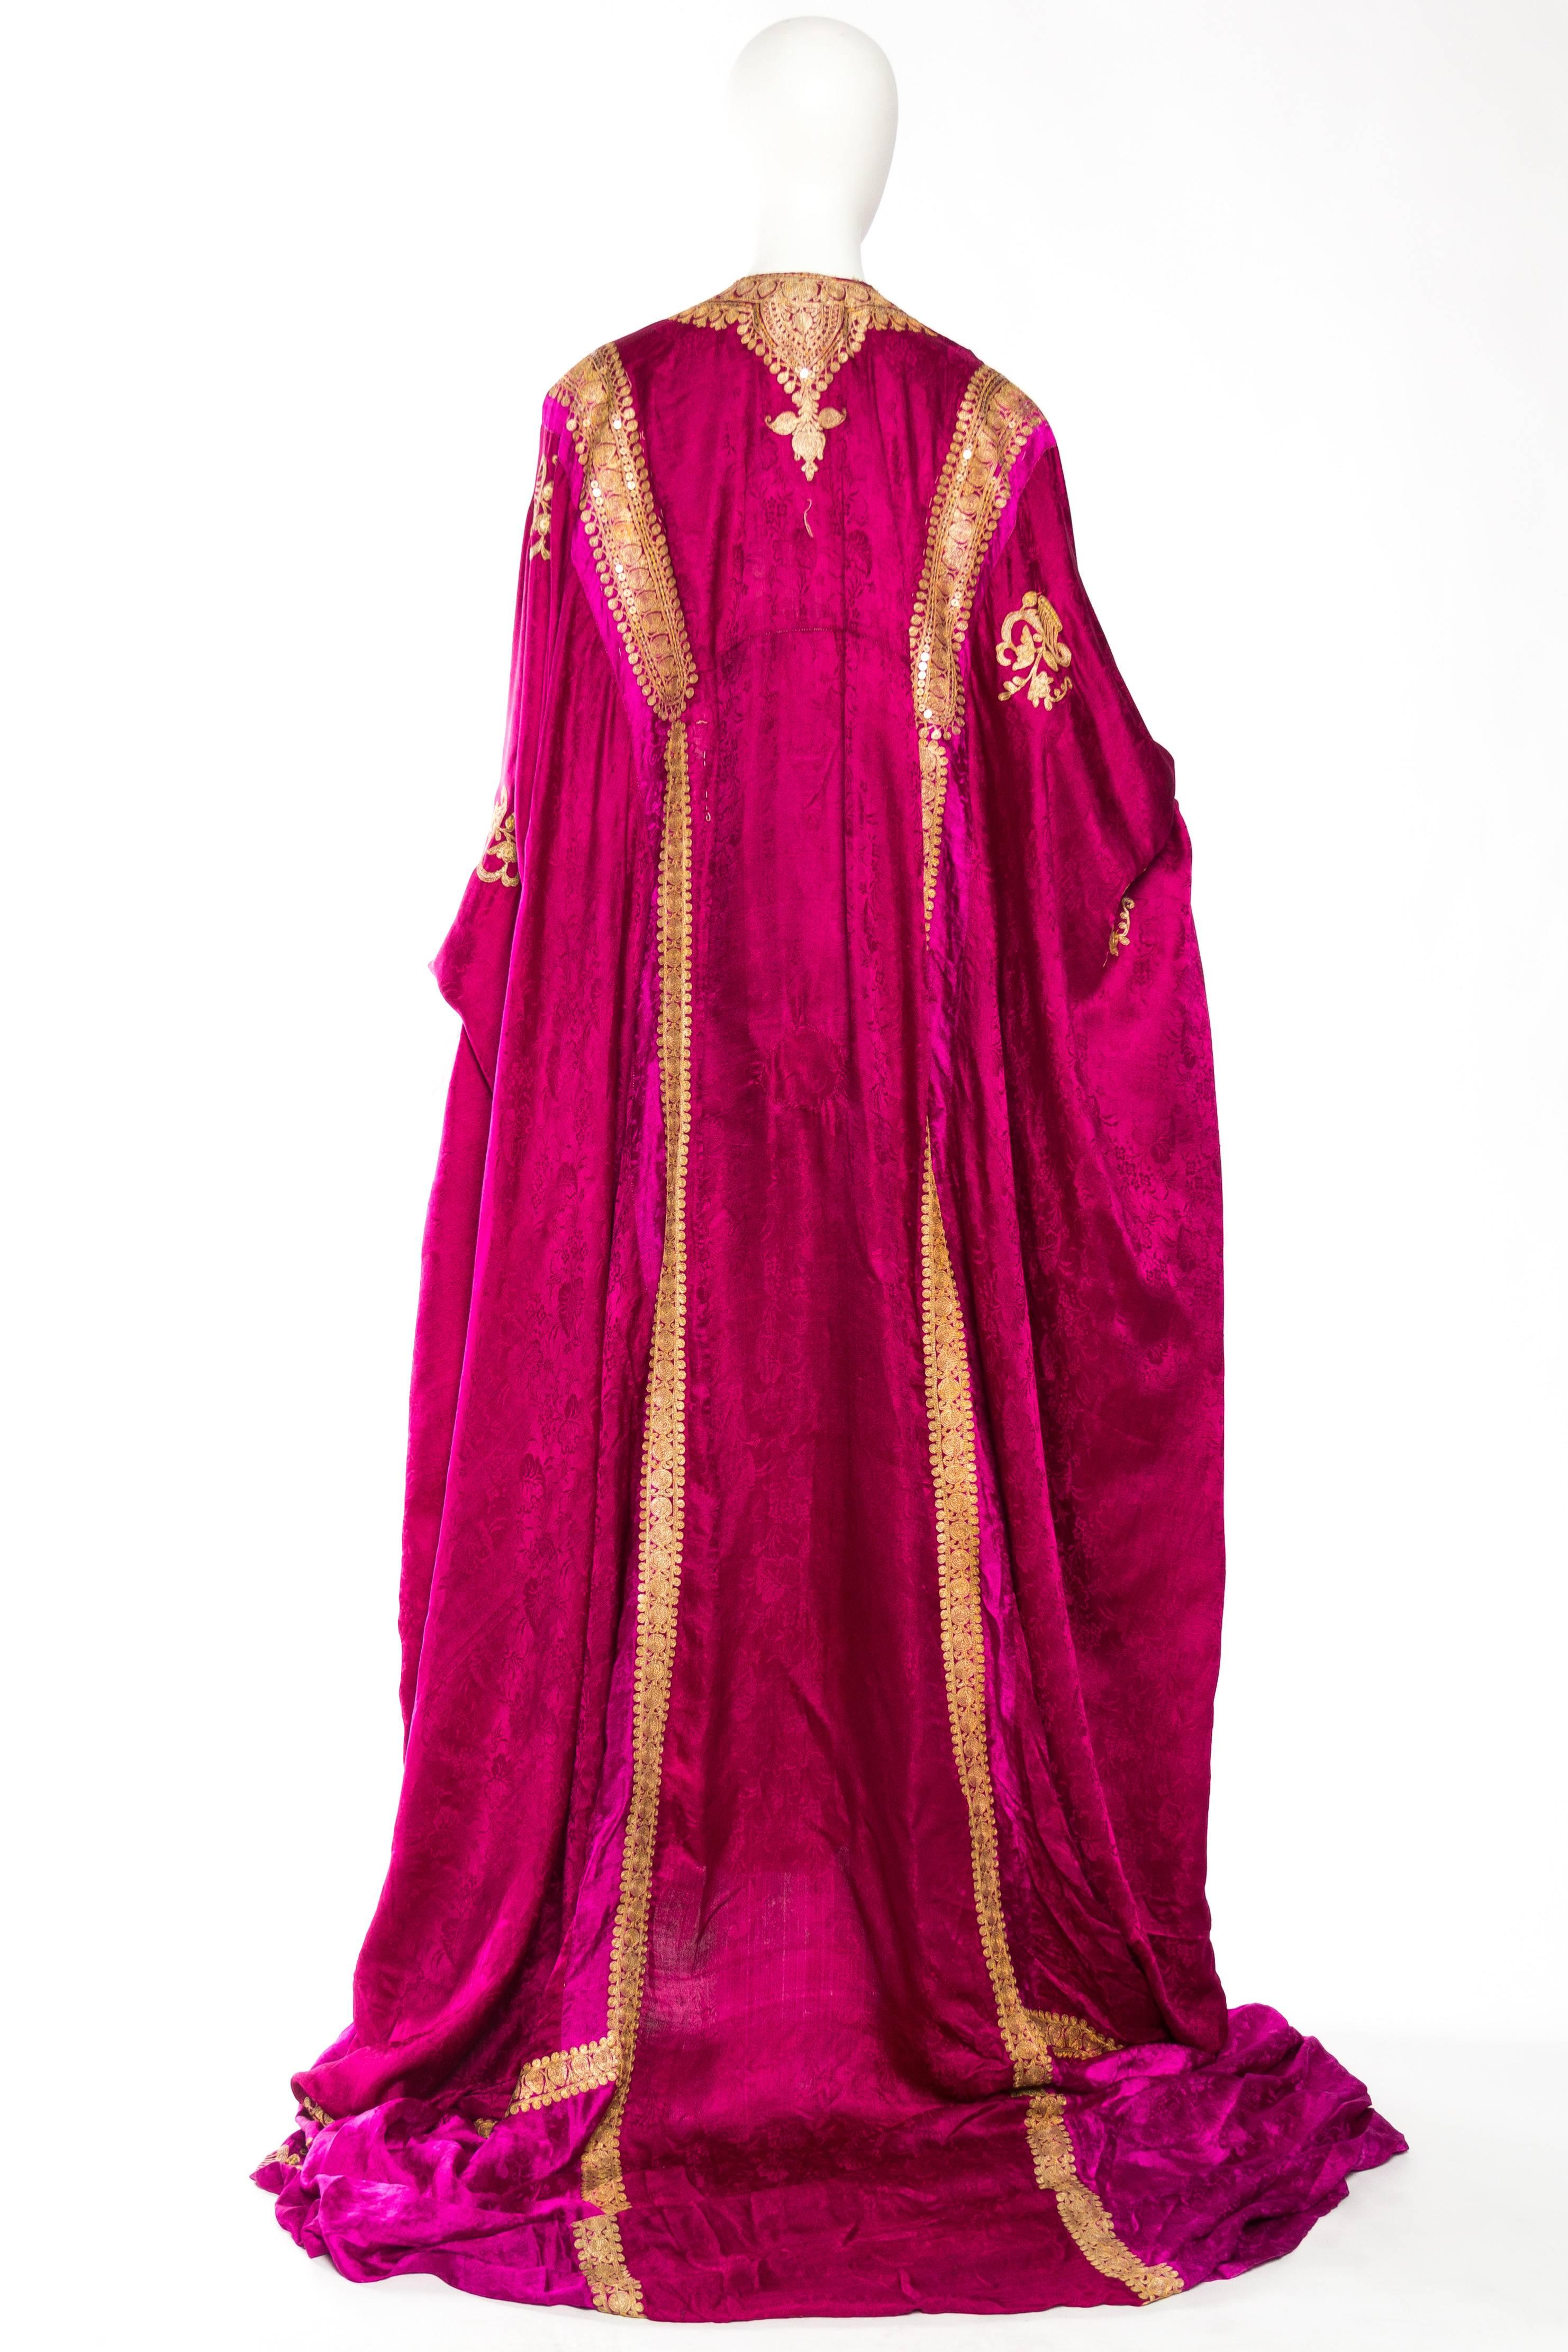 Women's or Men's Phenomenal Trained Silk Caftan With Elaborate Metal Embroidery Kaftan